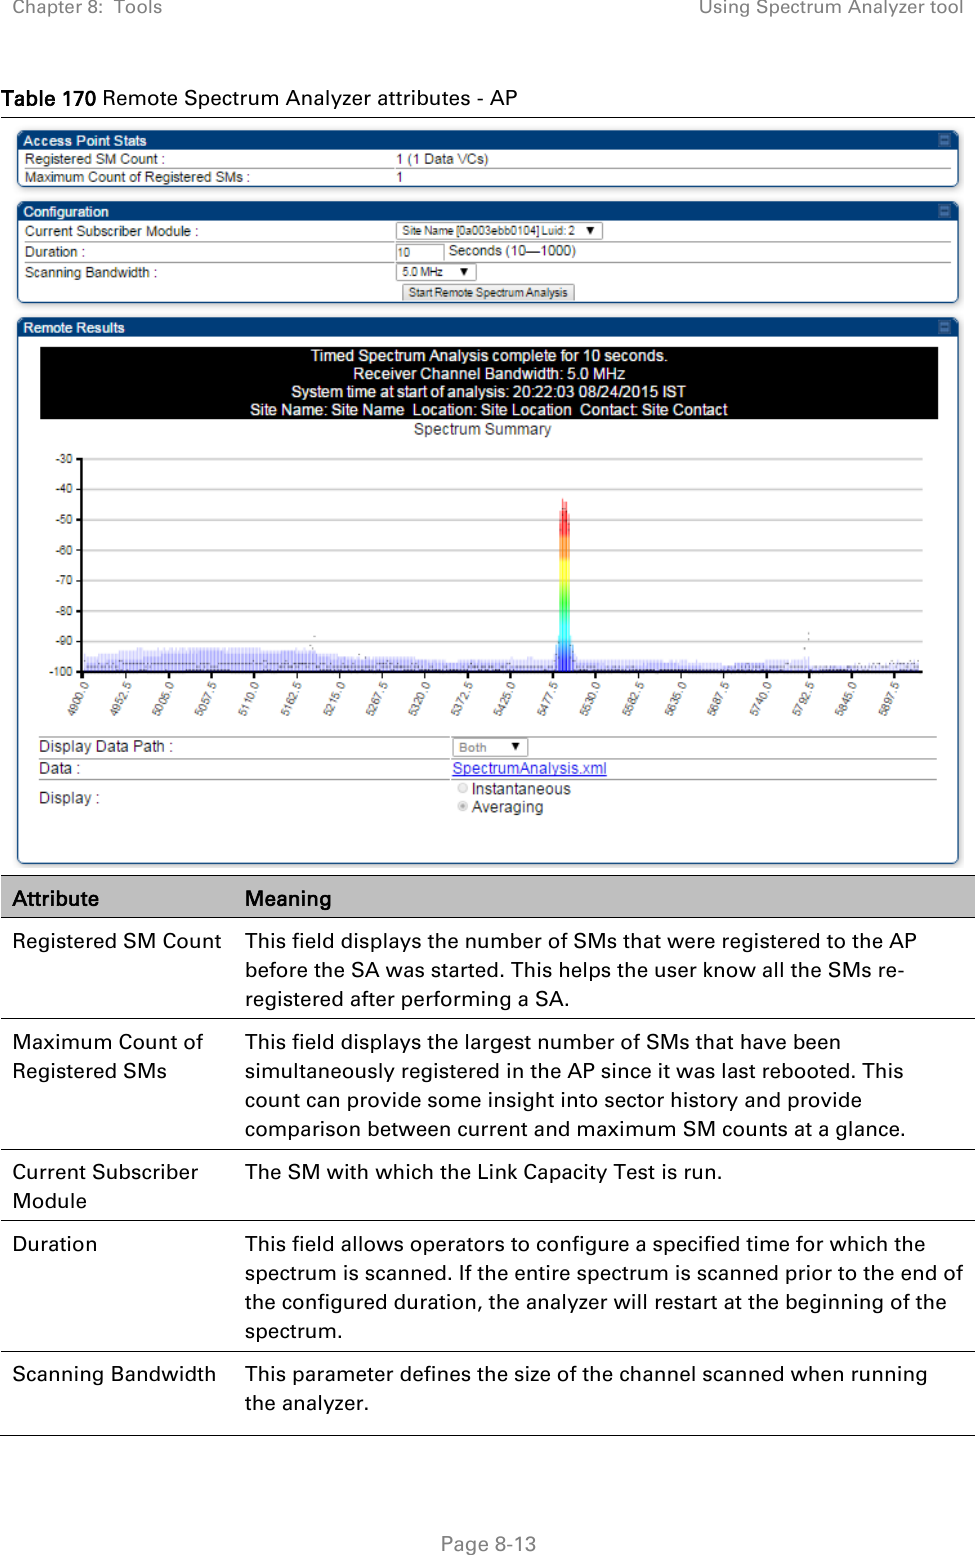 Chapter 8:  Tools Using Spectrum Analyzer tool   Page 8-13 Table 170 Remote Spectrum Analyzer attributes - AP  Attribute Meaning Registered SM Count This field displays the number of SMs that were registered to the AP before the SA was started. This helps the user know all the SMs re-registered after performing a SA. Maximum Count of Registered SMs This field displays the largest number of SMs that have been simultaneously registered in the AP since it was last rebooted. This count can provide some insight into sector history and provide comparison between current and maximum SM counts at a glance. Current Subscriber Module The SM with which the Link Capacity Test is run. Duration This field allows operators to configure a specified time for which the spectrum is scanned. If the entire spectrum is scanned prior to the end of the configured duration, the analyzer will restart at the beginning of the spectrum. Scanning Bandwidth This parameter defines the size of the channel scanned when running the analyzer. 